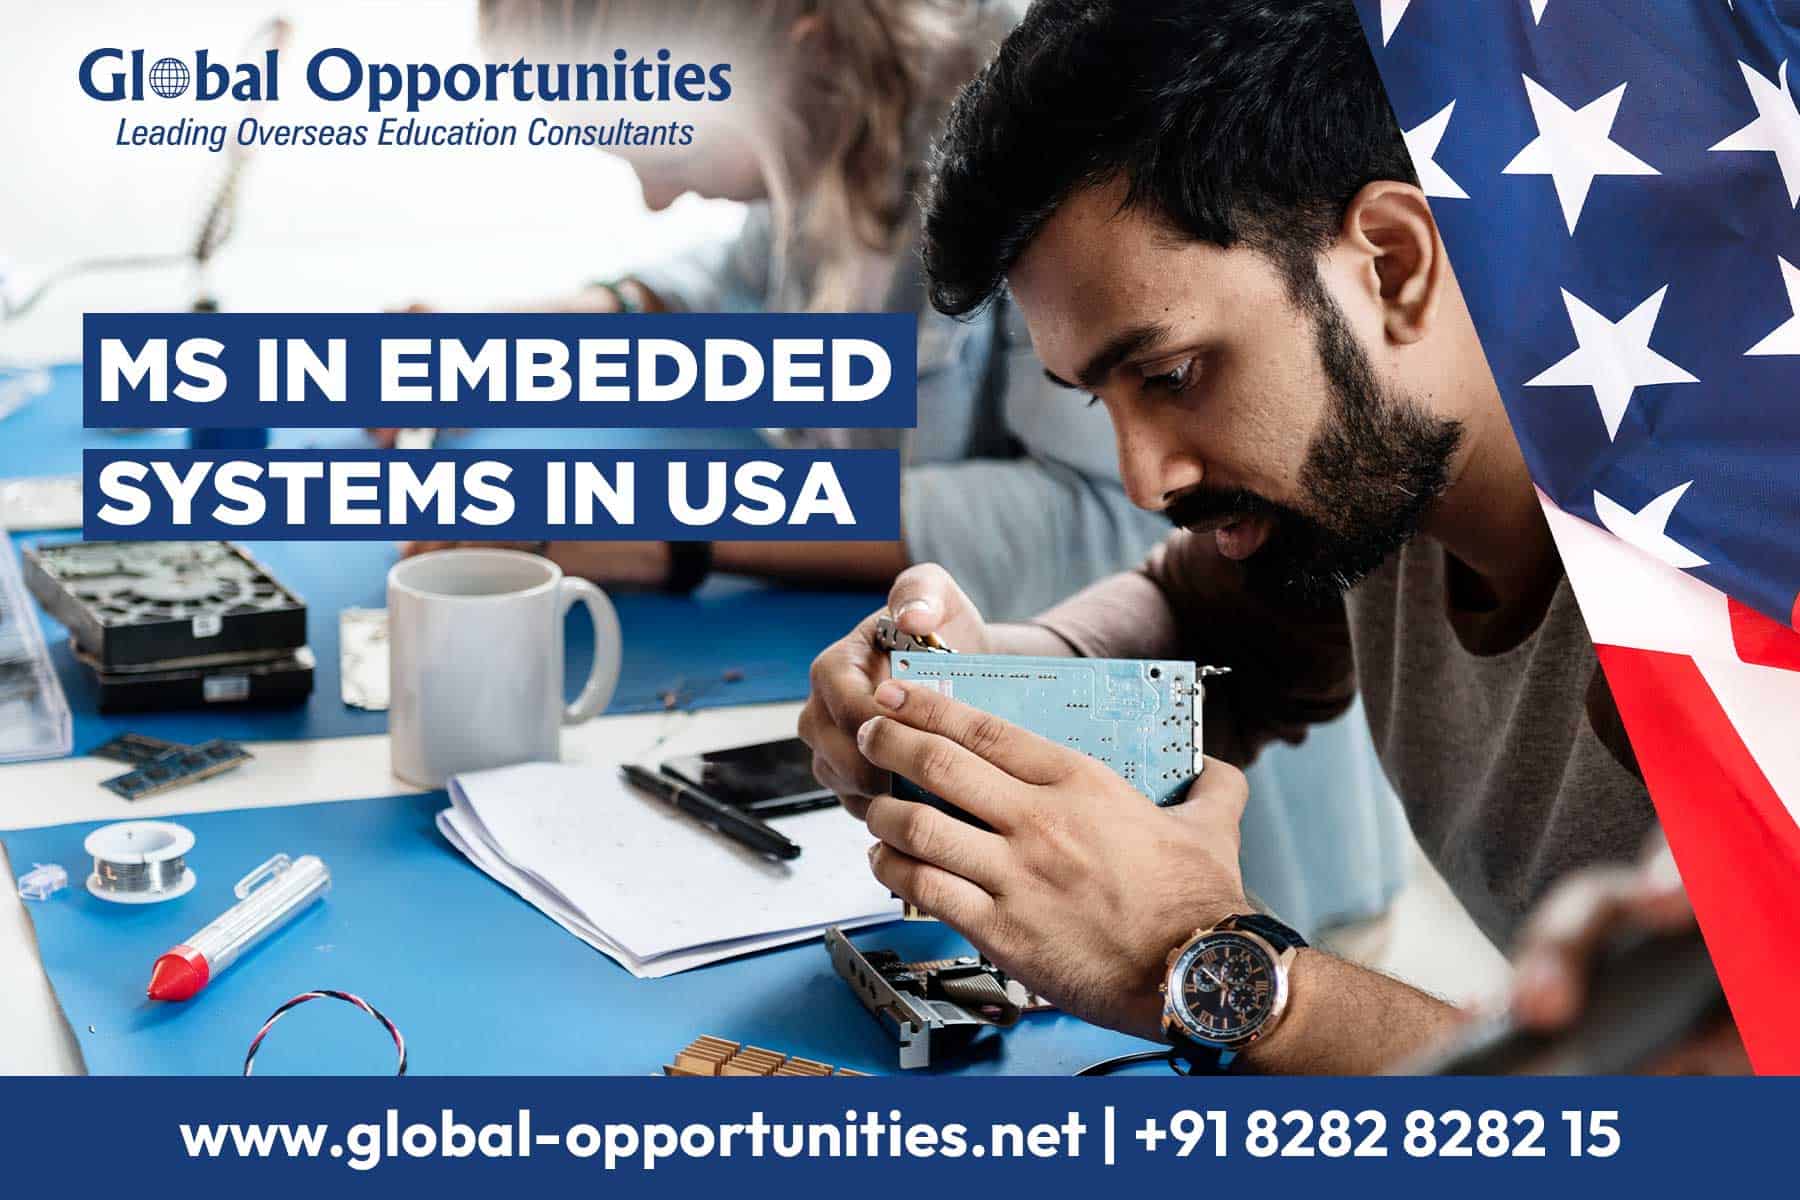 MS in Embedded Systems in USA